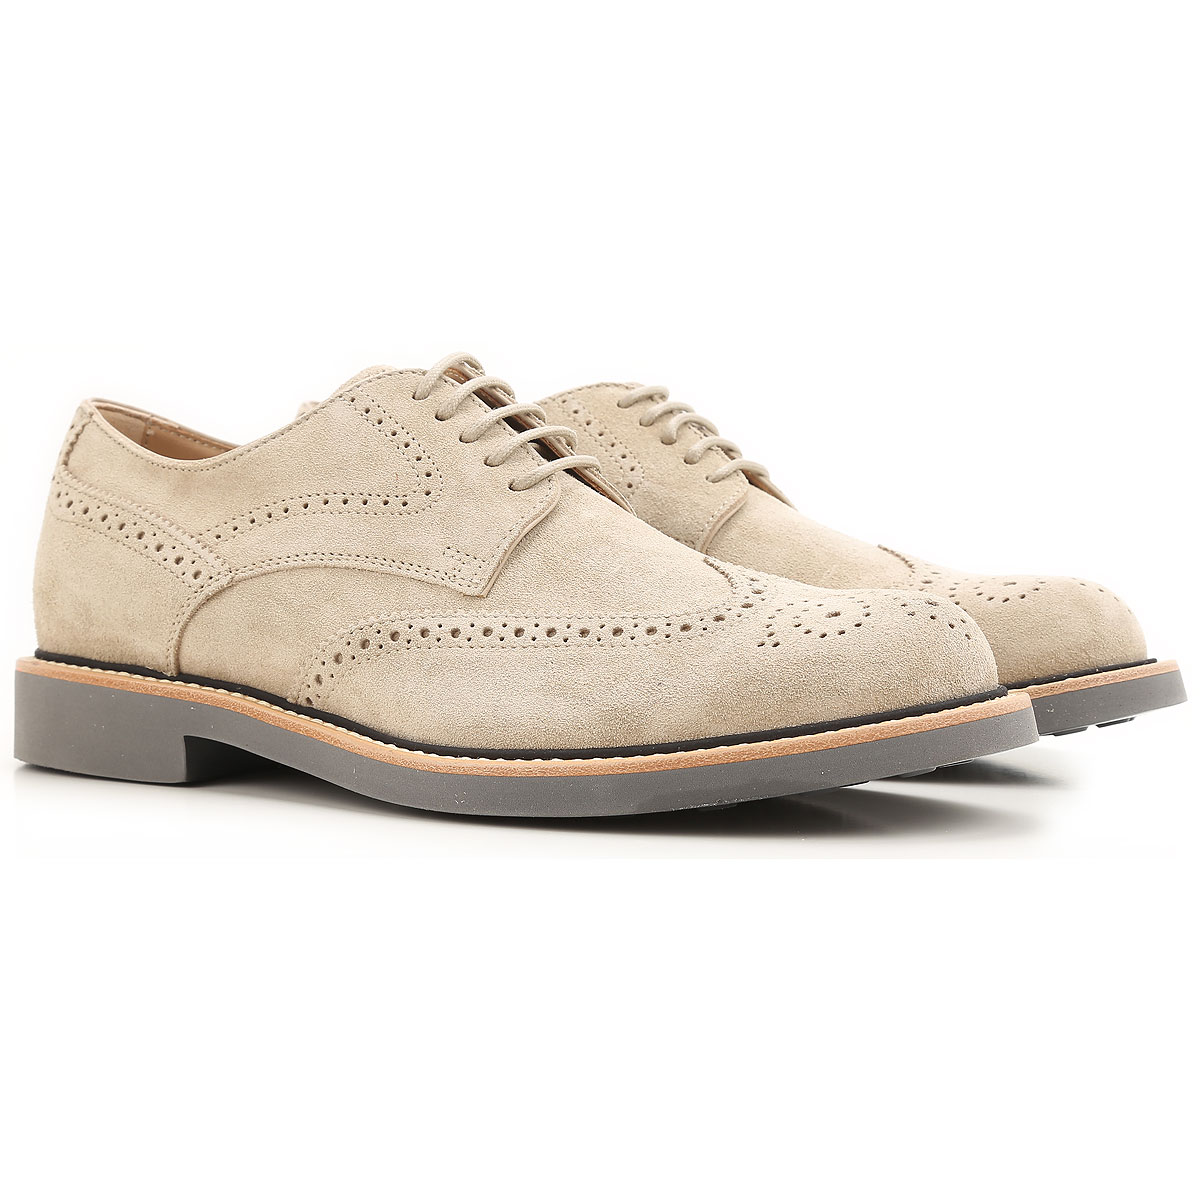 Tod's Chaussure Brogue Outlet, Beige, Daim, 2017, 39.5 40 42.5 44